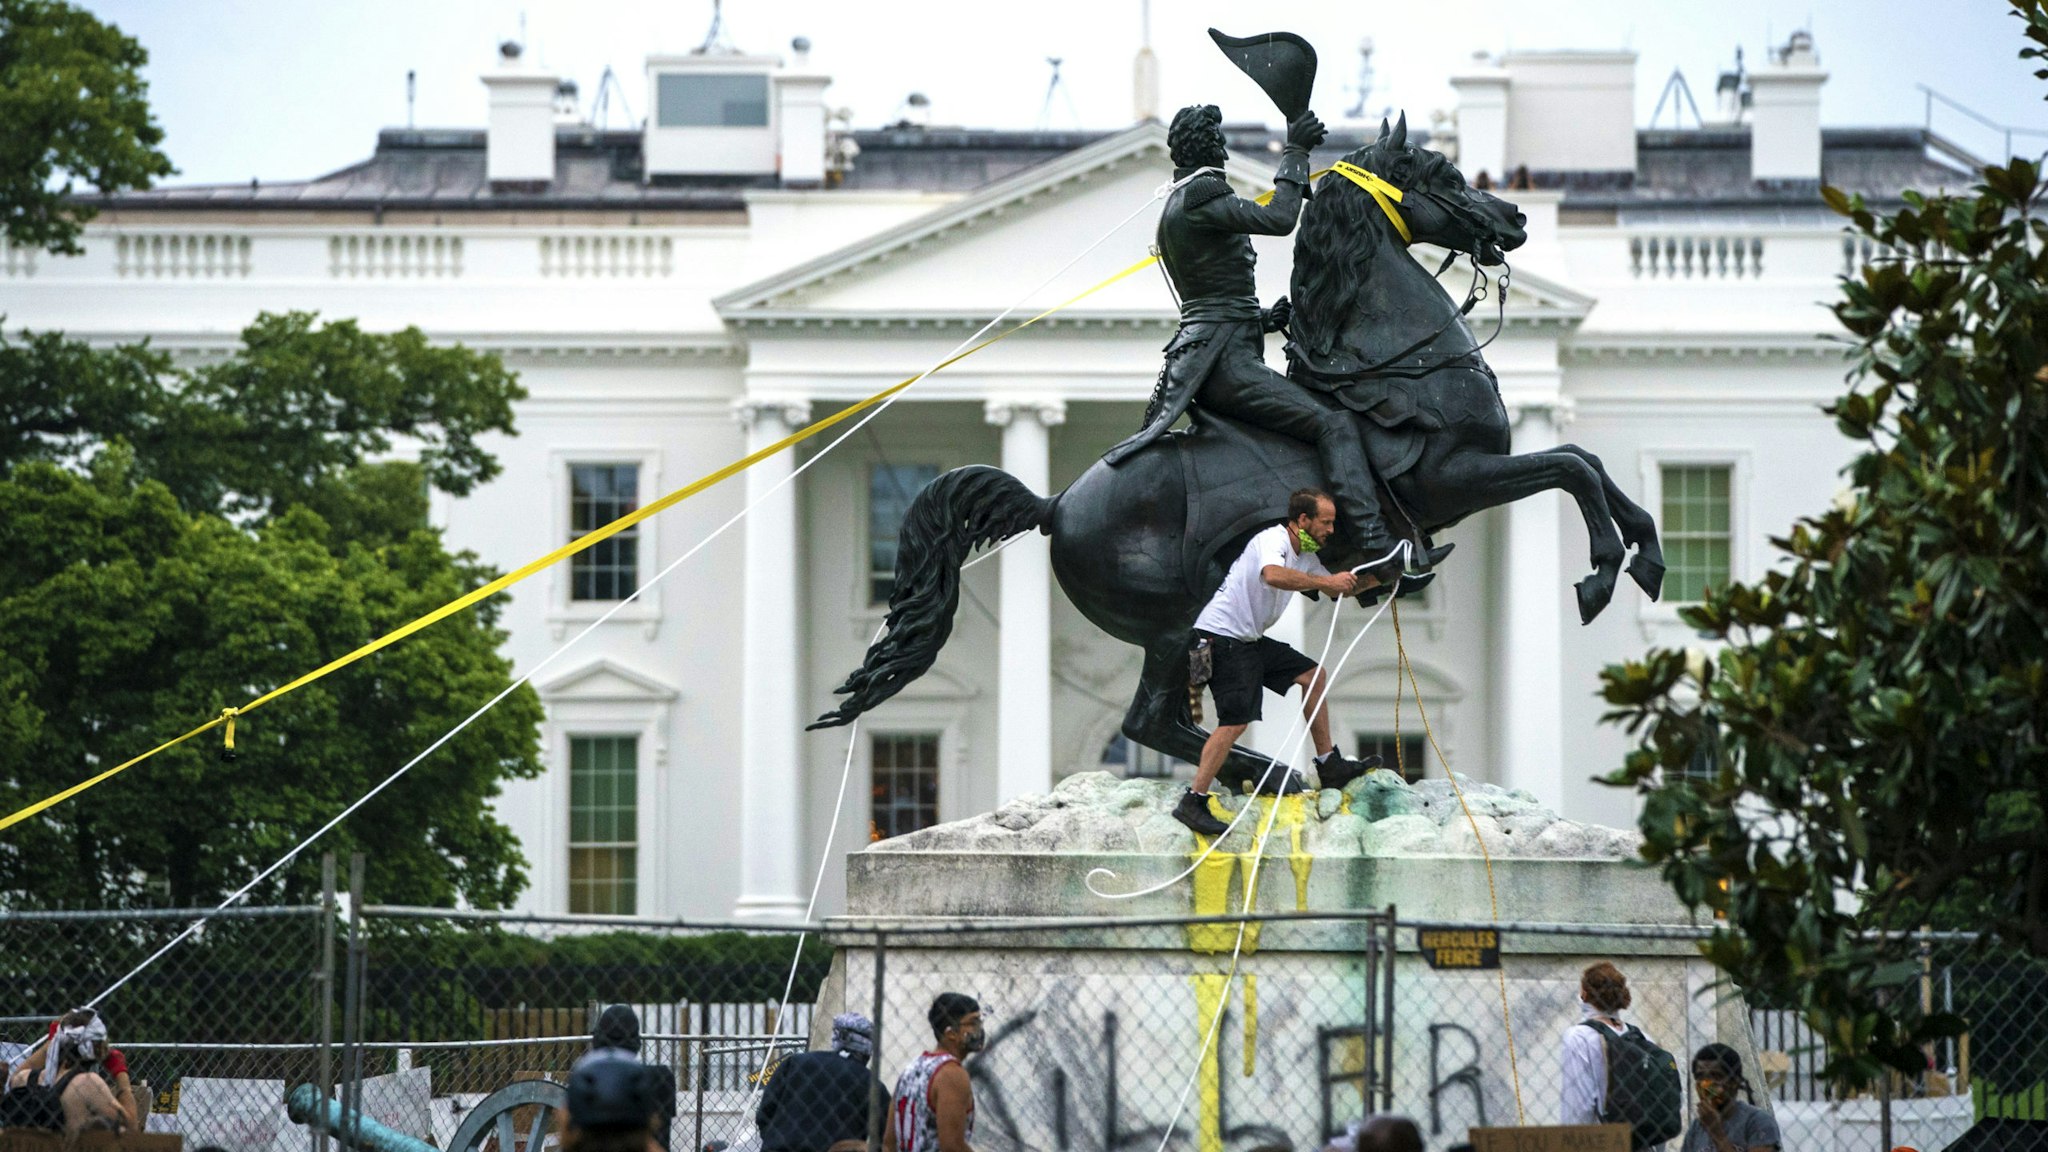 WASHINGTON, DC - JUNE 22: Protesters attempt to pull down the statue of Andrew Jackson in Lafayette Square near the White House on June 22, 2020 in Washington, DC. Protests continue around the country over police brutality, racial injustice and the deaths of African Americans while in police custody.